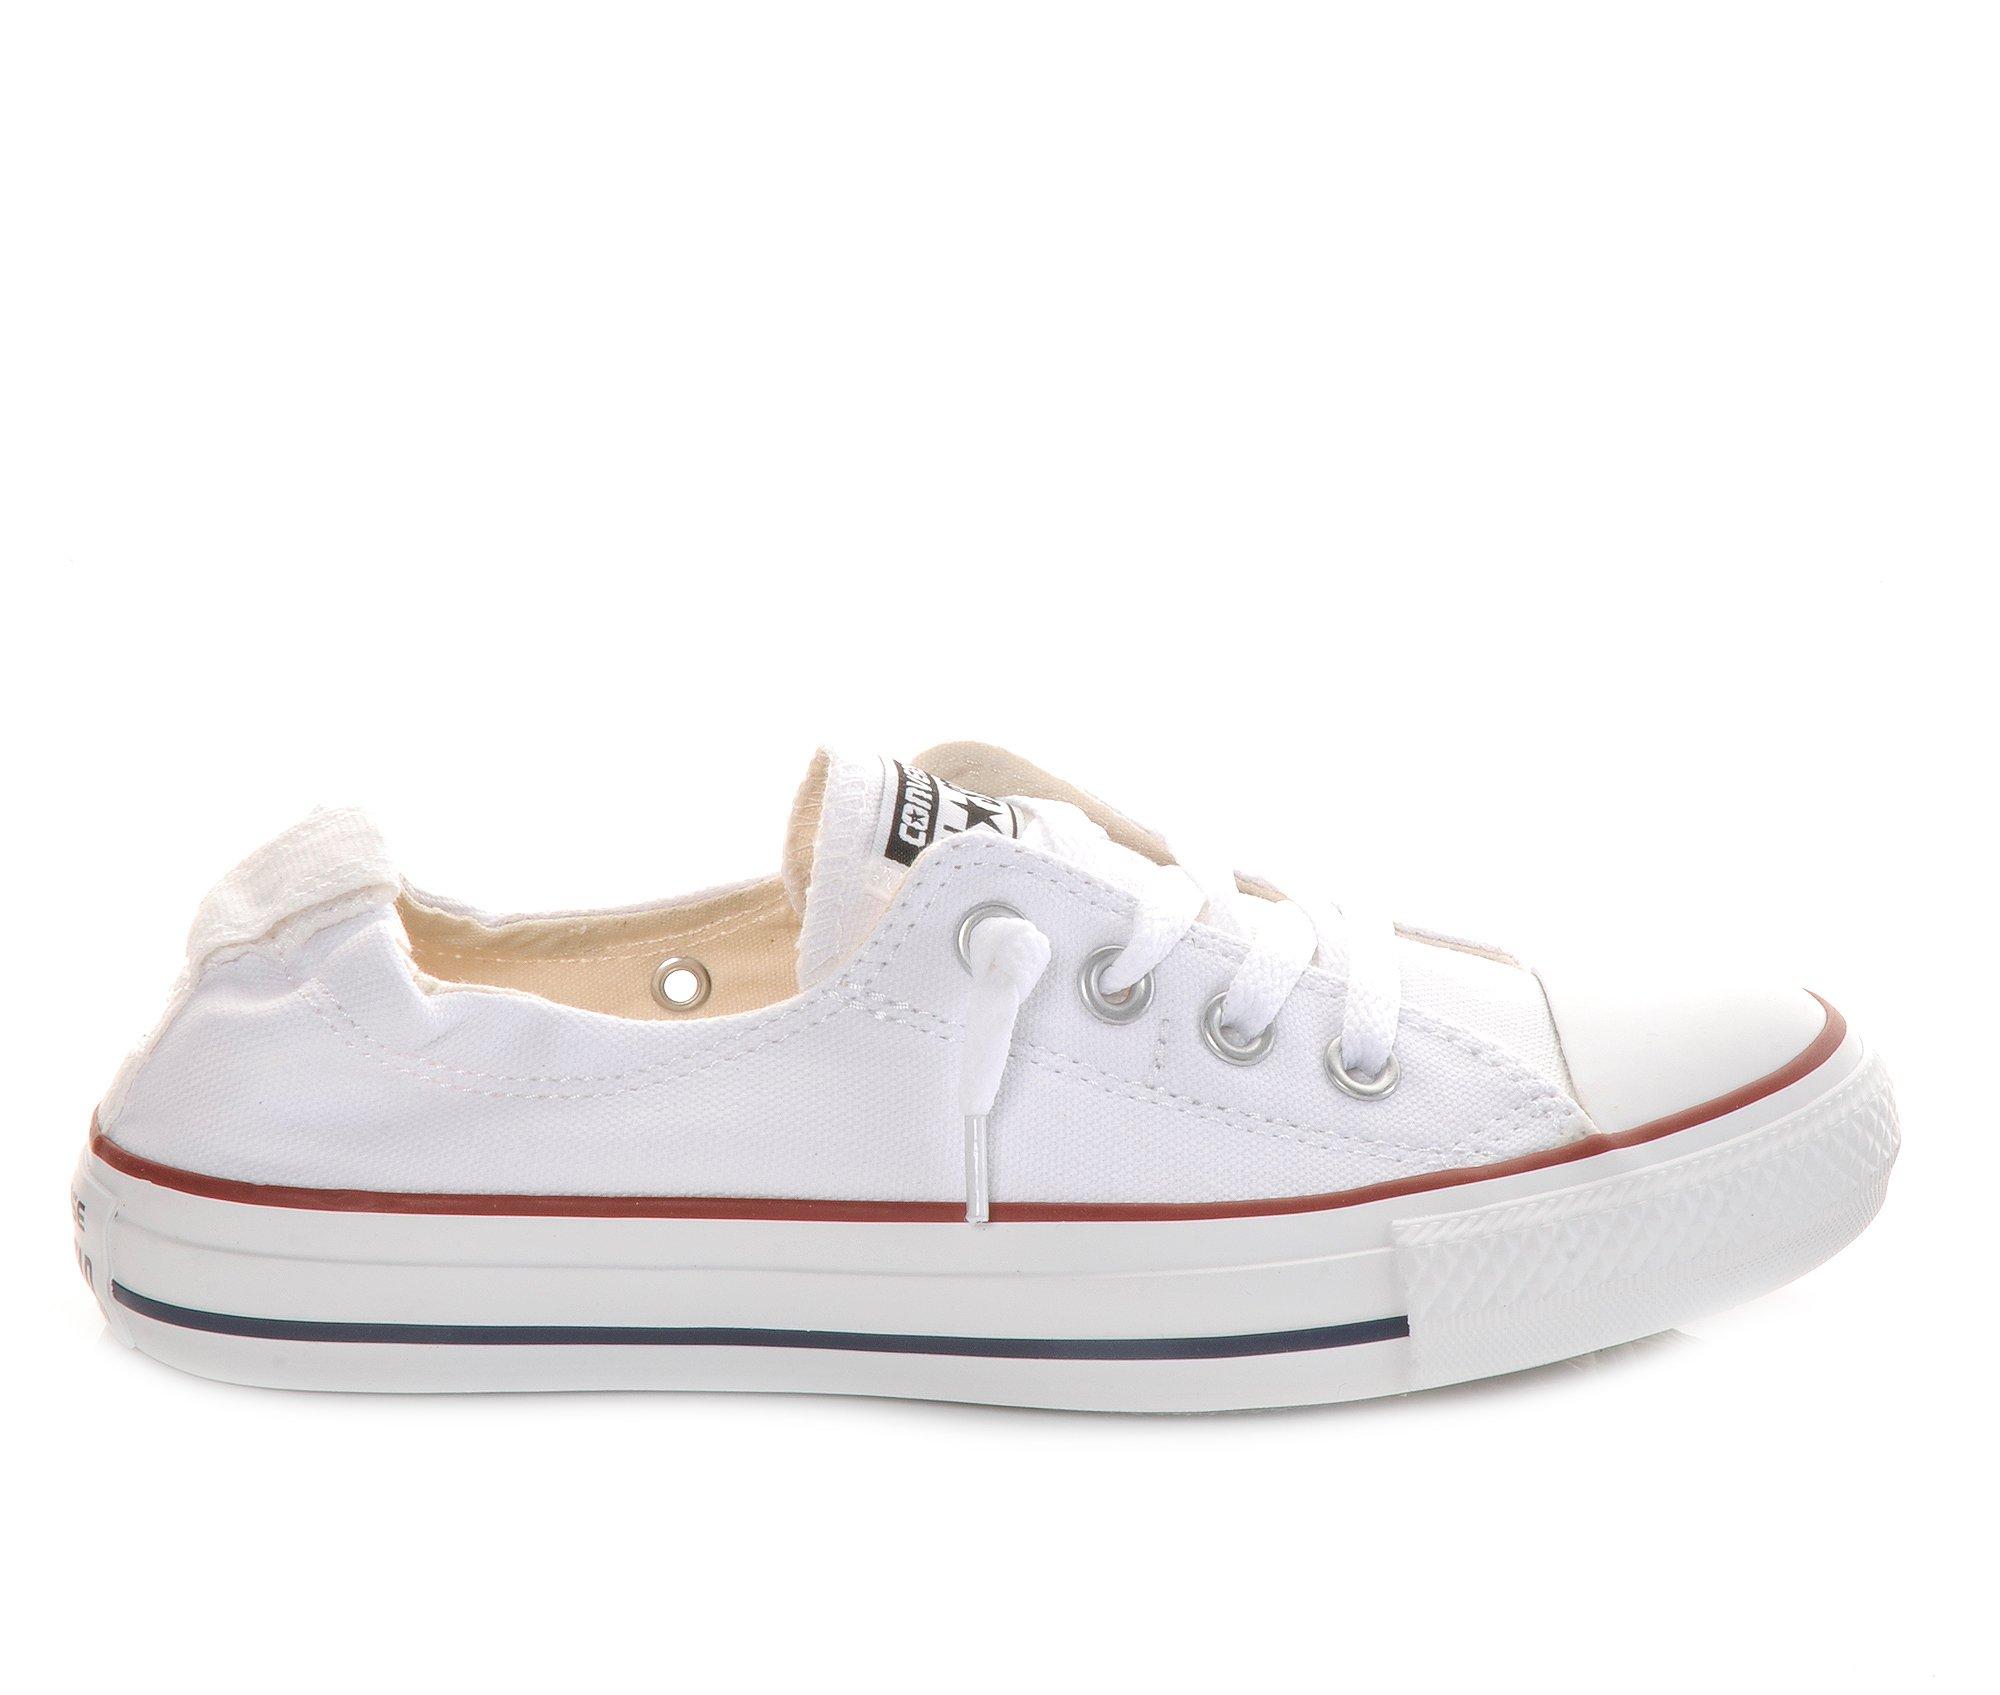 Women's Chuck Taylor All Star Sneakers